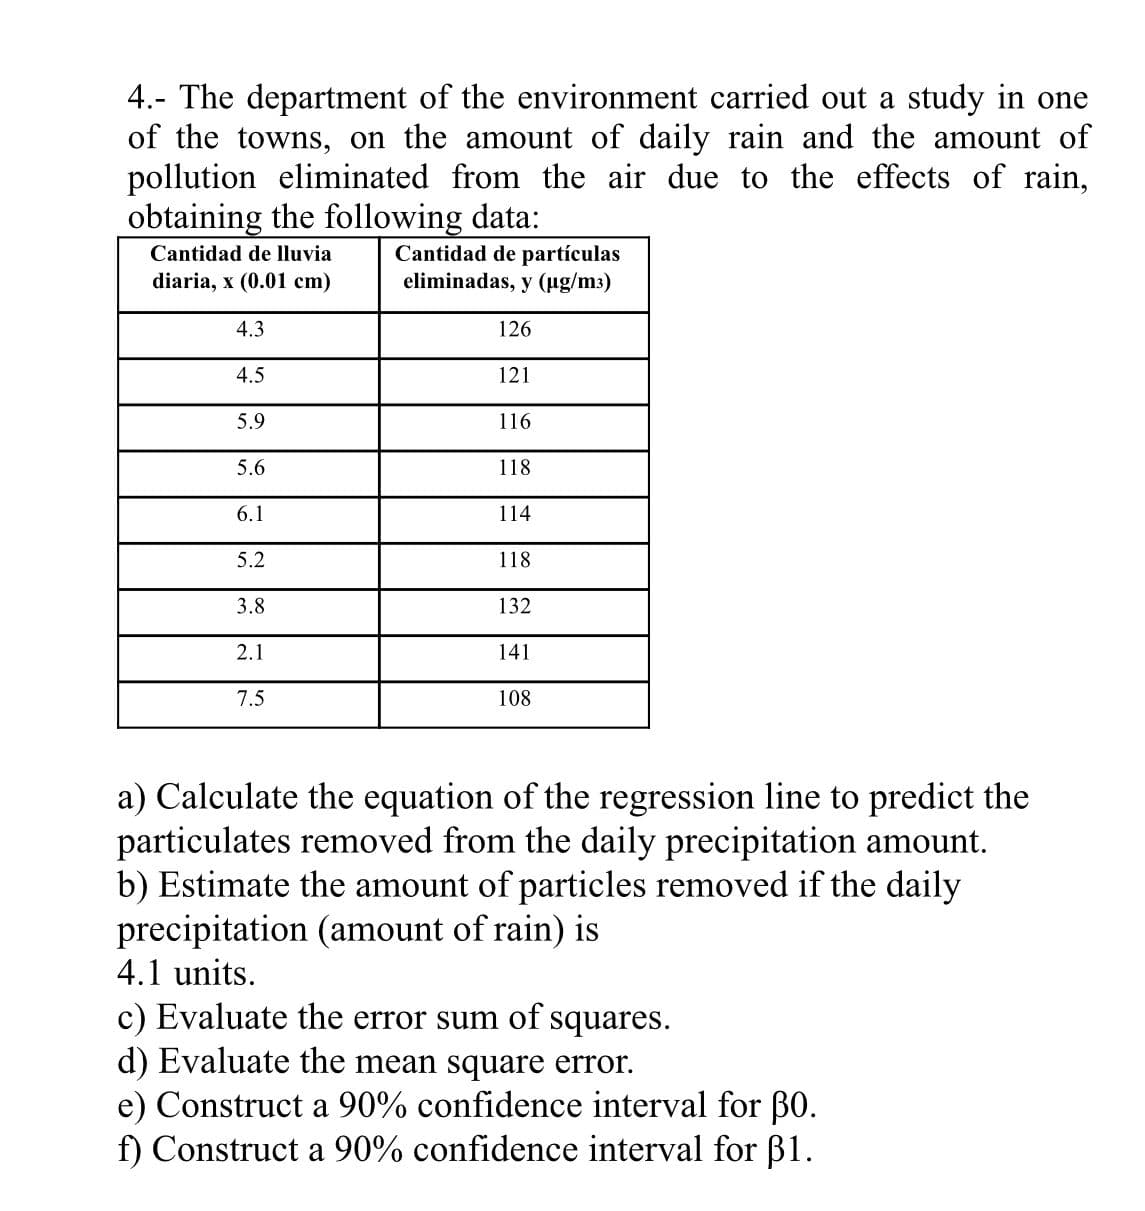 4.- The department of the environment carried out a study in one
of the towns, on the amount of daily rain and the amount of
pollution eliminated from the air due to the effects of rain,
obtaining the following data:
Cantidad de partículas
eliminadas, y (ug/m3)
Cantidad de lluvia
diaria, x (0.01 cm)
4.3
126
4.5
121
5.9
116
5.6
118
6.1
114
5.2
118
3.8
132
2.1
141
7.5
108
a) Calculate the equation of the regression line to predict the
particulates removed from the daily precipitation amount.
b) Estimate the amount of particles removed if the daily
precipitation (amount of rain) is
4.1 units.
c) Evaluate the error sum of squares.
d) Evaluate the mean square error.
e) Construct a 90% confidence interval for B0.
f) Construct a 90% confidence interval for B1.
